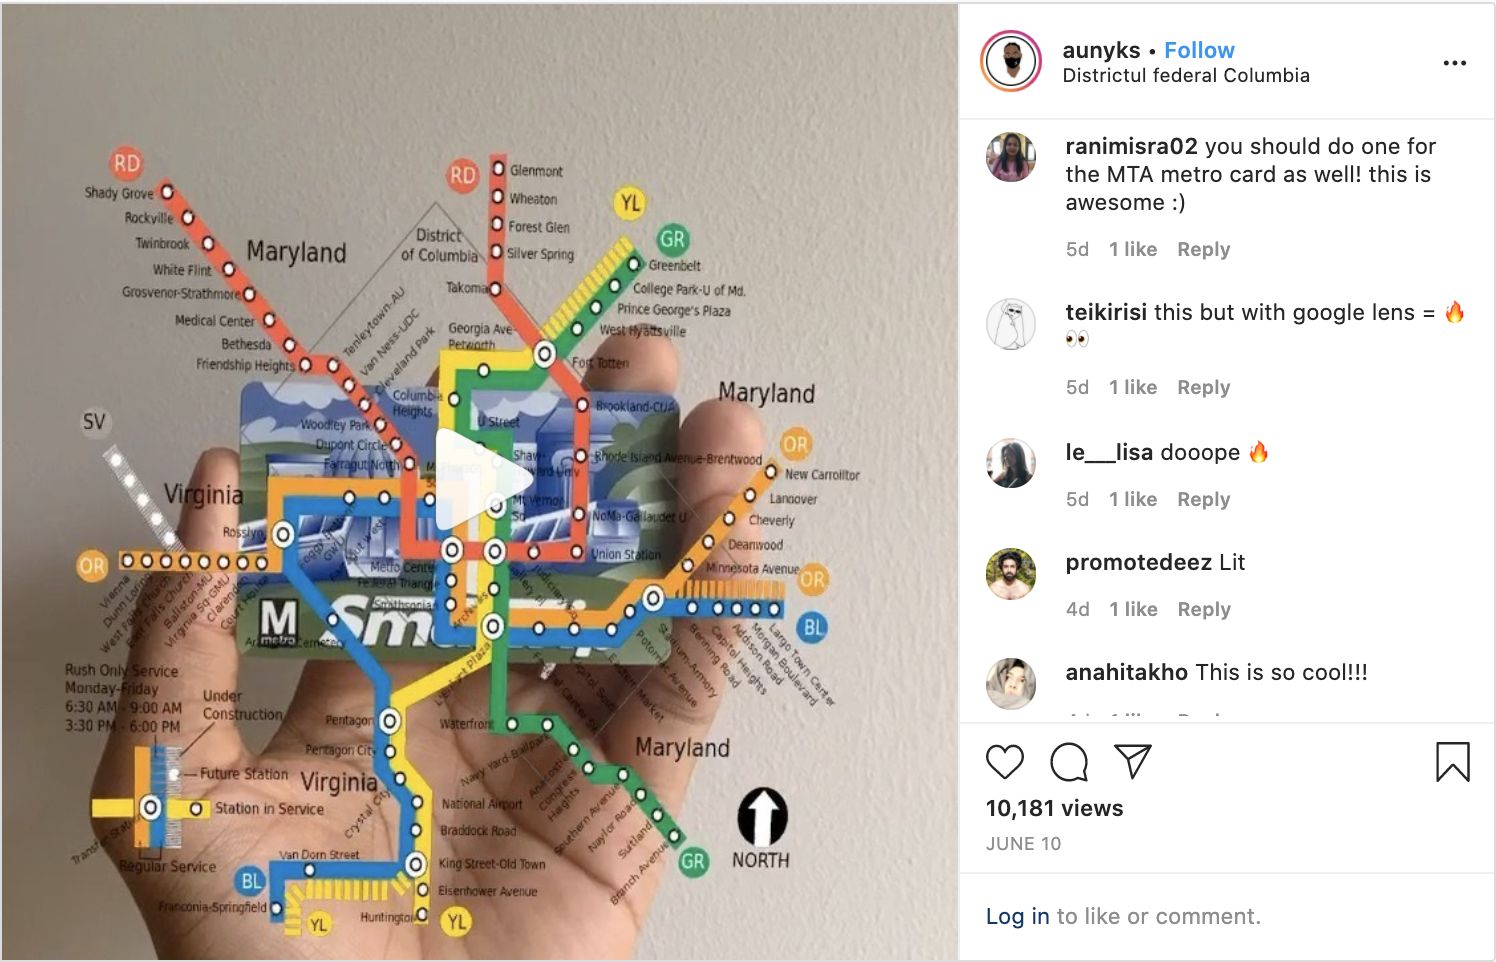 A screenshot of the Instagram post that featured the unreleased Instagram version of the Smartmap Card filter.